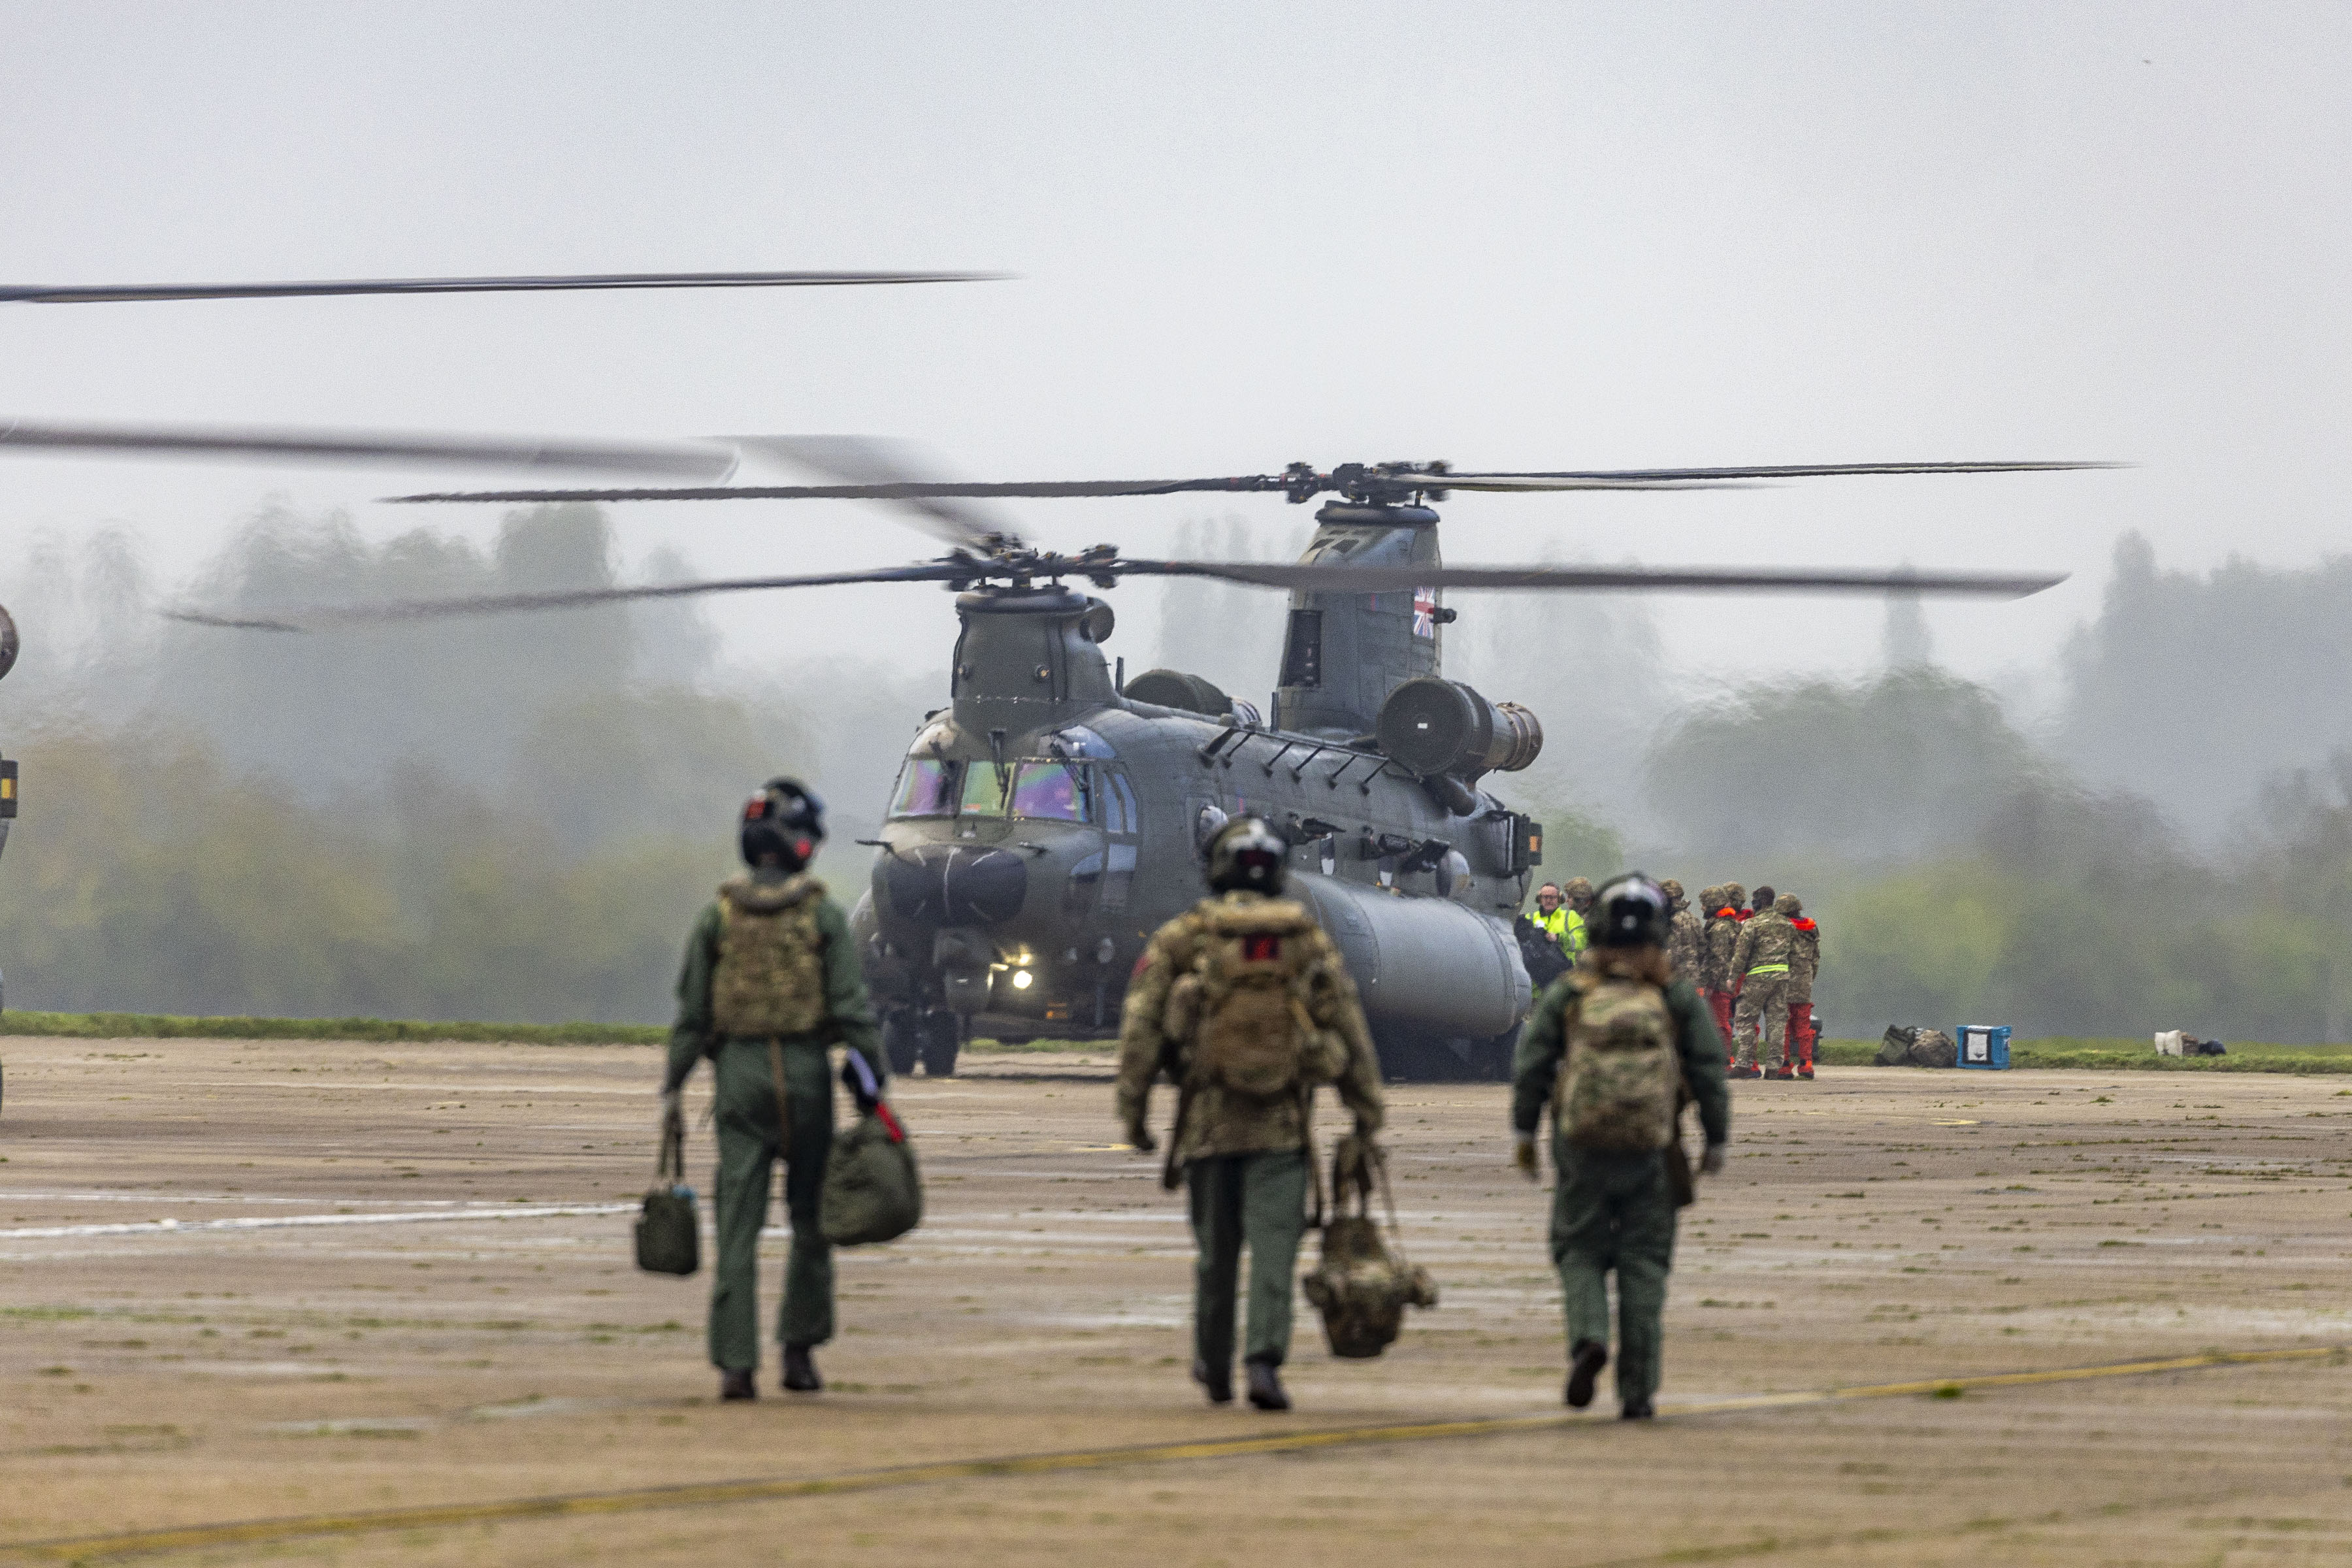 Image shows aircrew walking towards a Chinook helicopter.